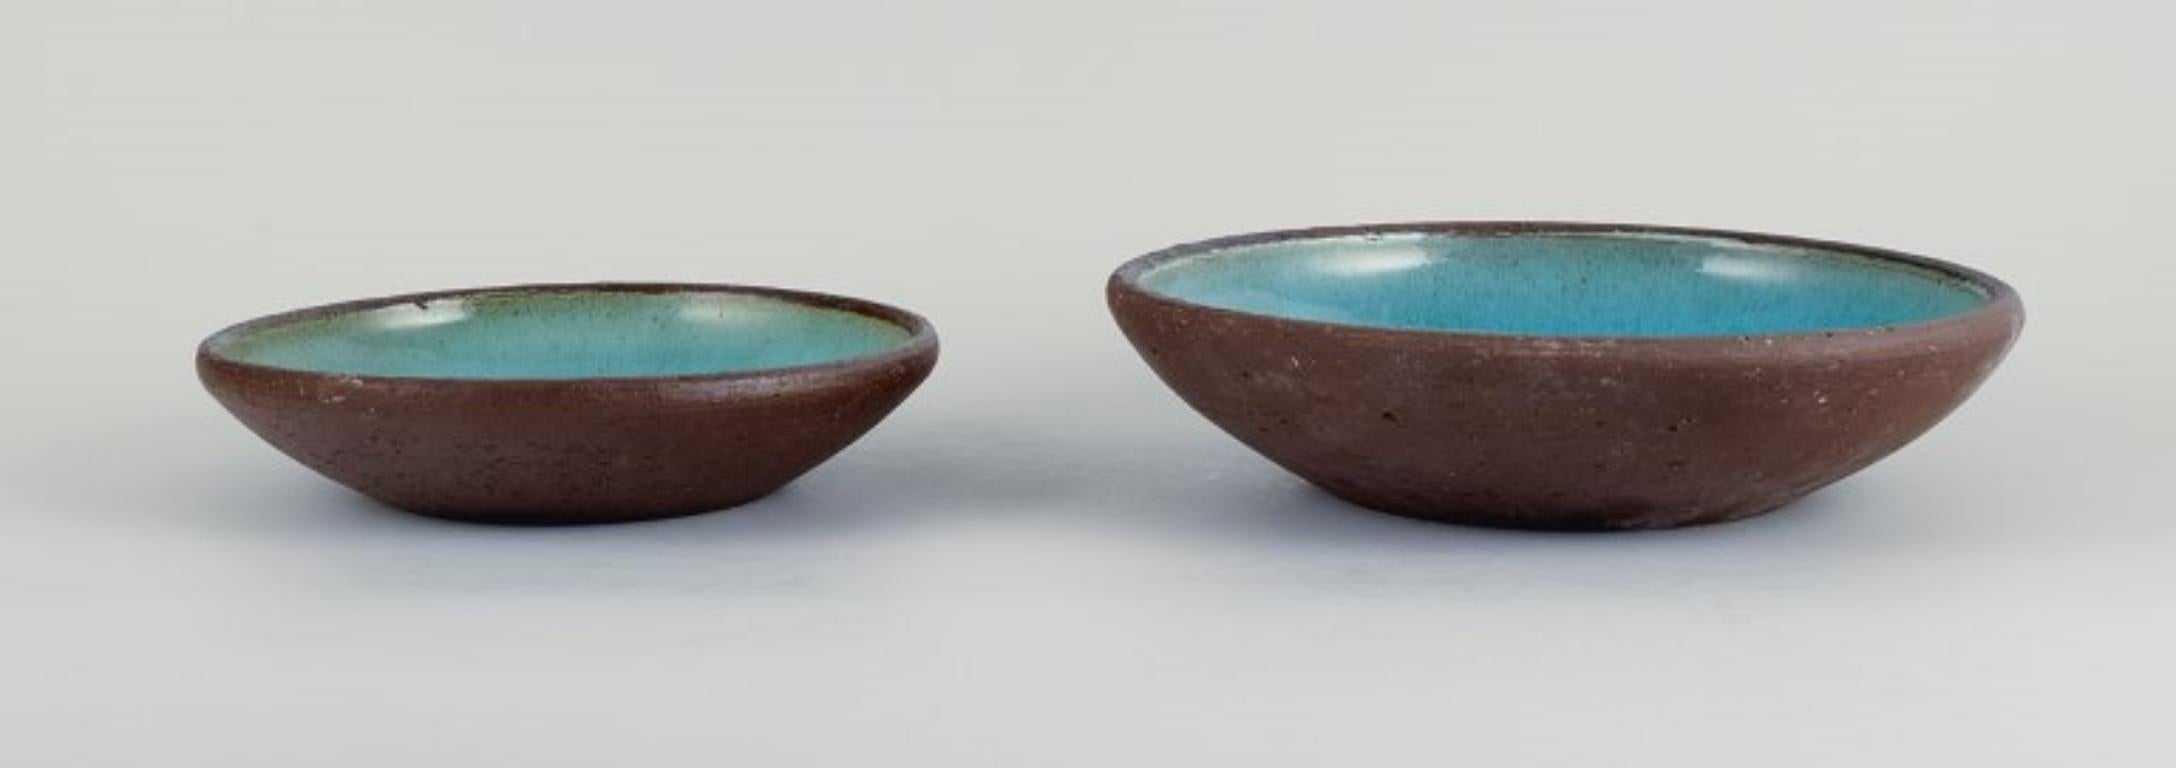 OSA, Denmark.
Two large retro unique ceramic bowls with glaze in turquoise tones.
1970s.
In perfect condition.
Largest measurement: D 23.5 x H 6.0 cm.

OSA was a collaboration between Aase Feilberg, Chr. Frederiksen and Gutte Eriksen.